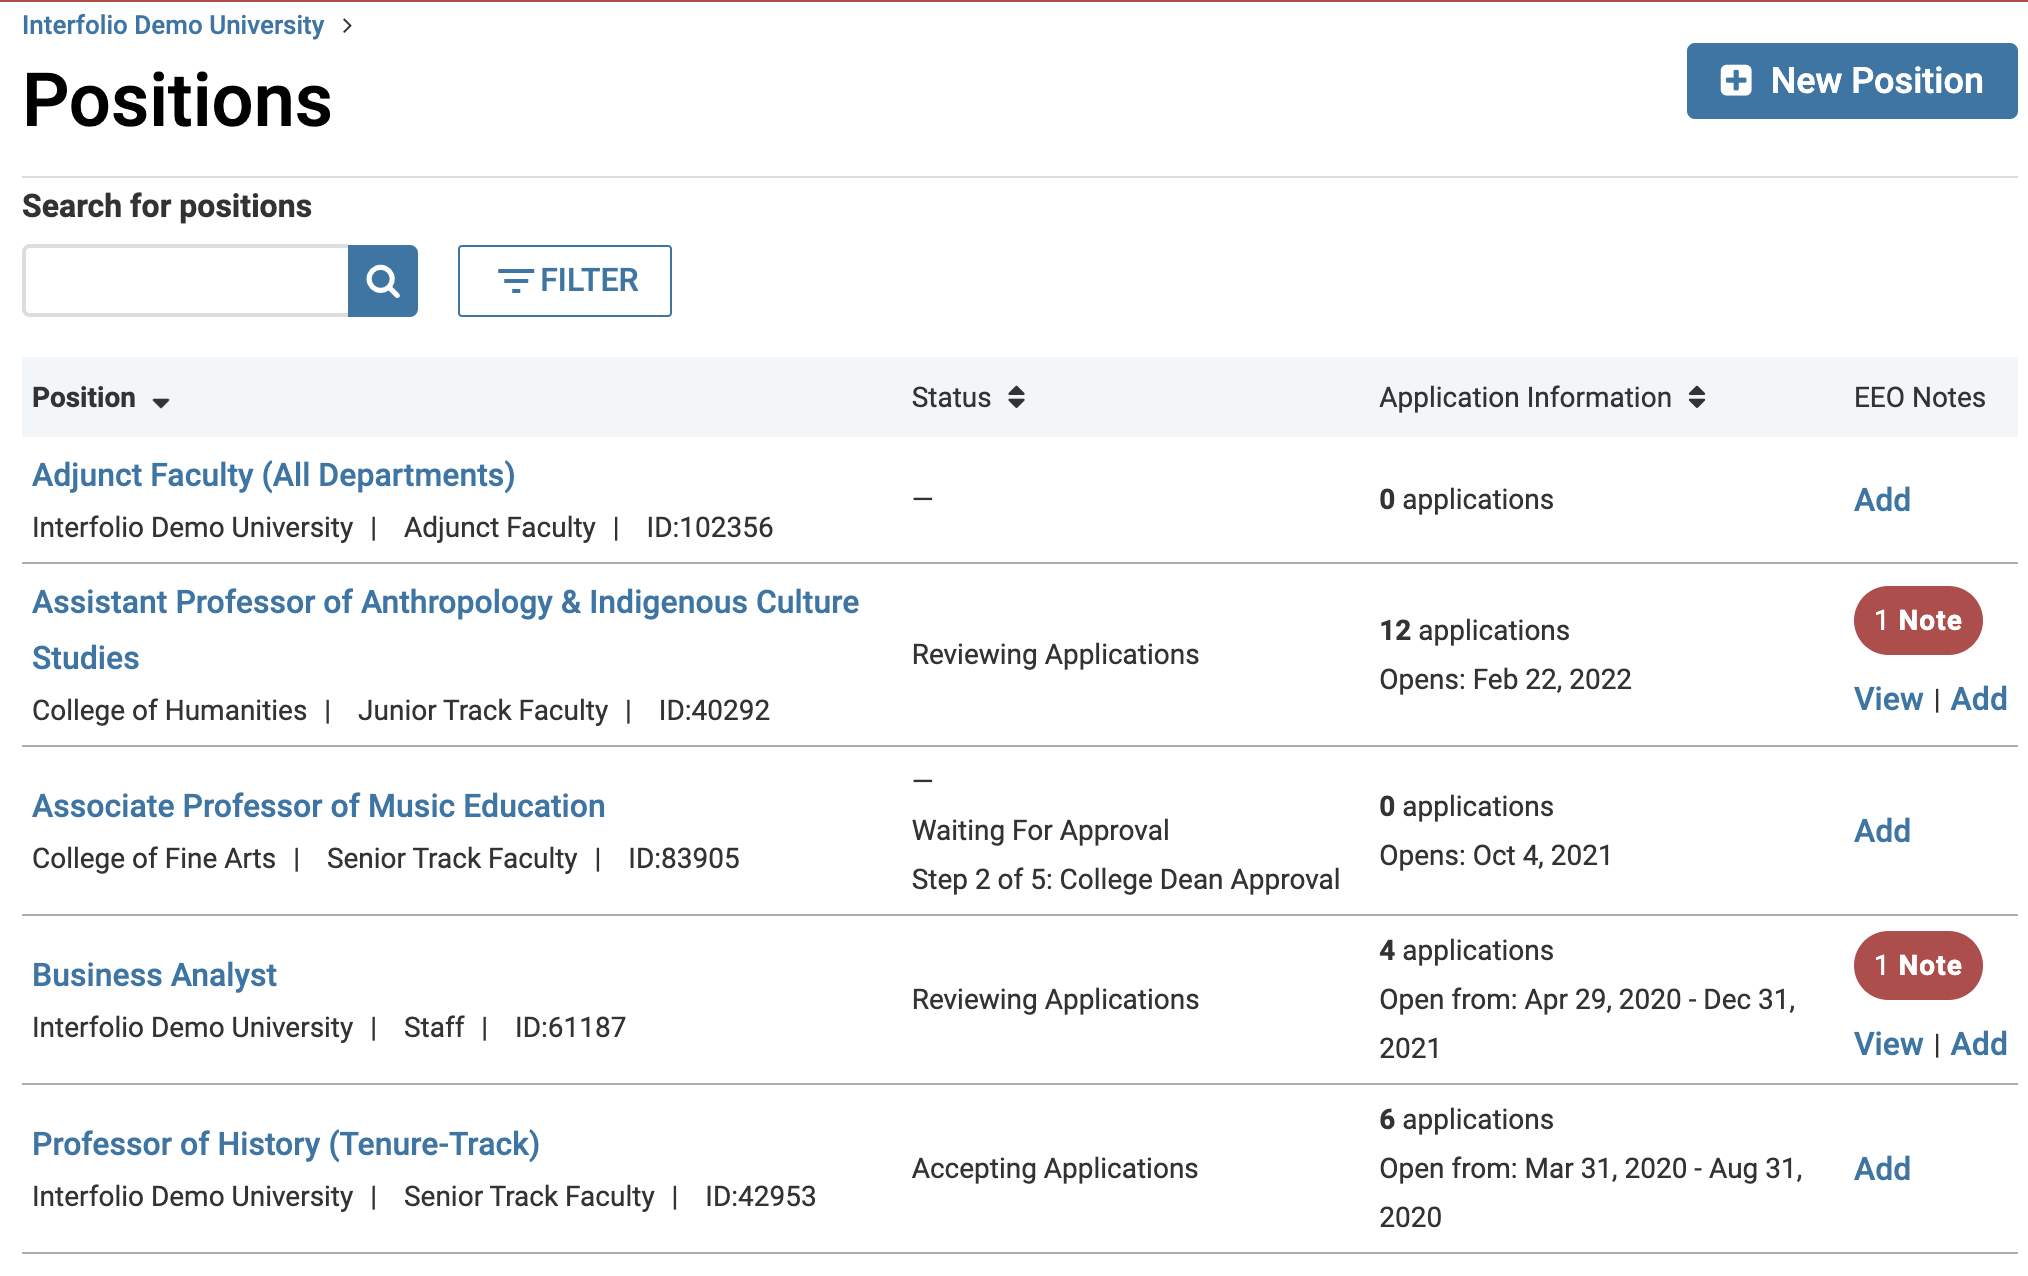 Positions page with Positions, Status, Application Information, and EEO Notes columns